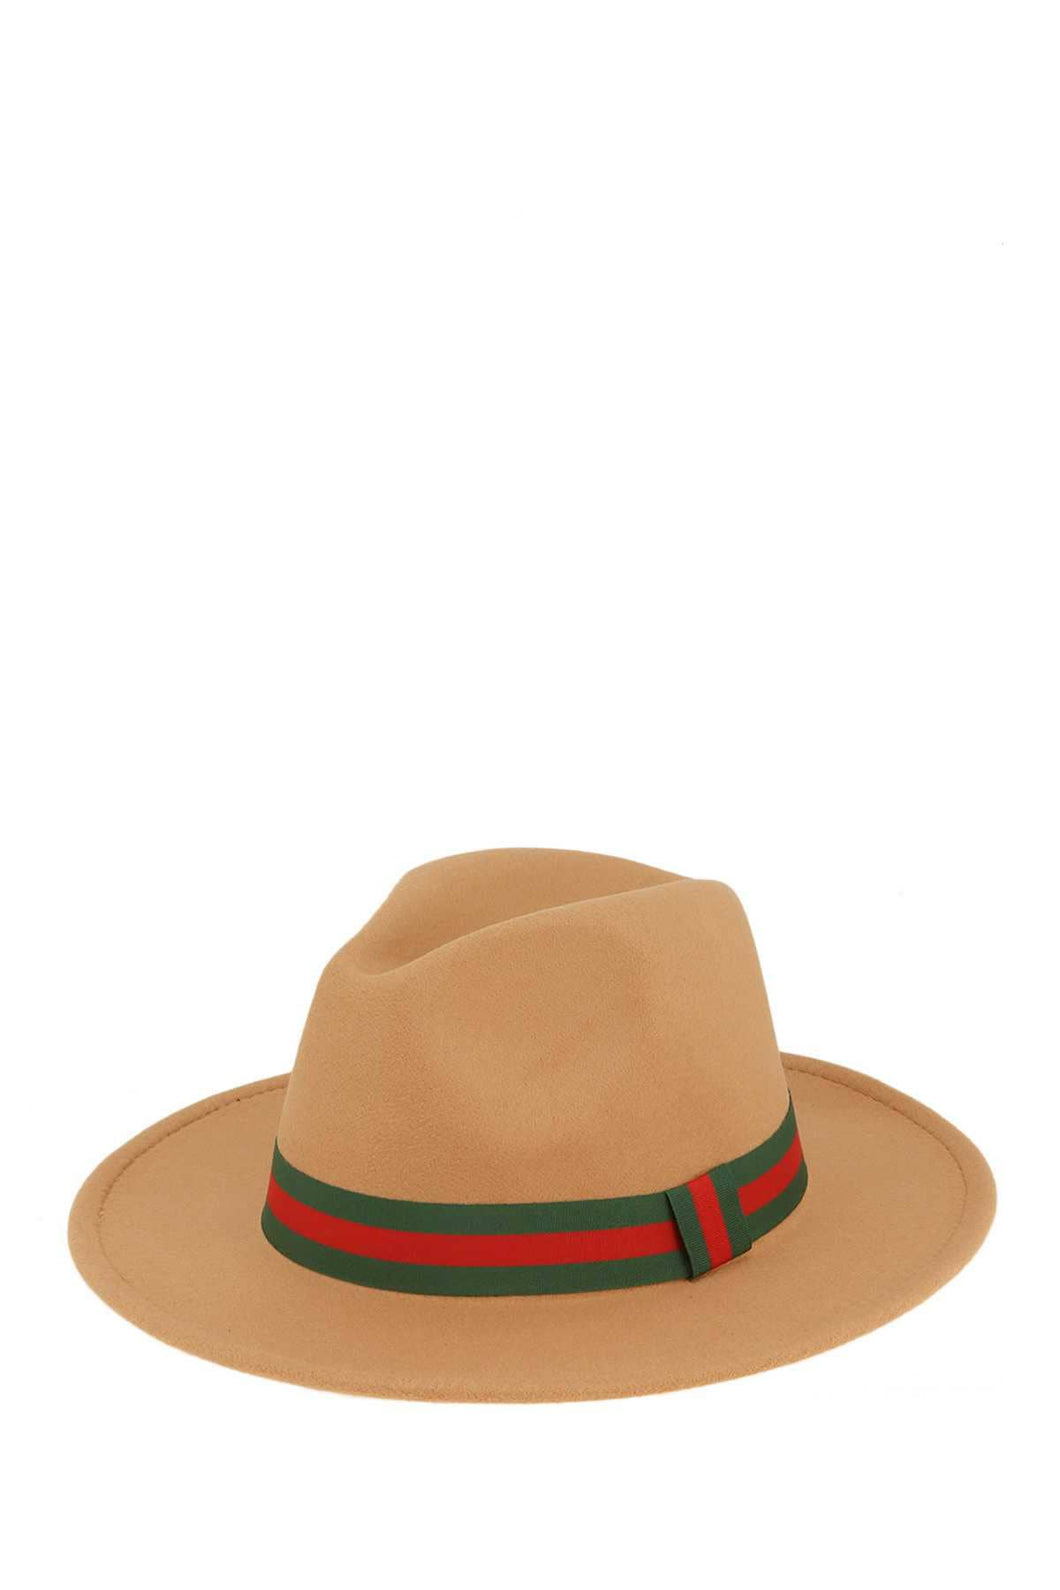 Shop Neighbors - Green and Red Band Basic Fedora Hat